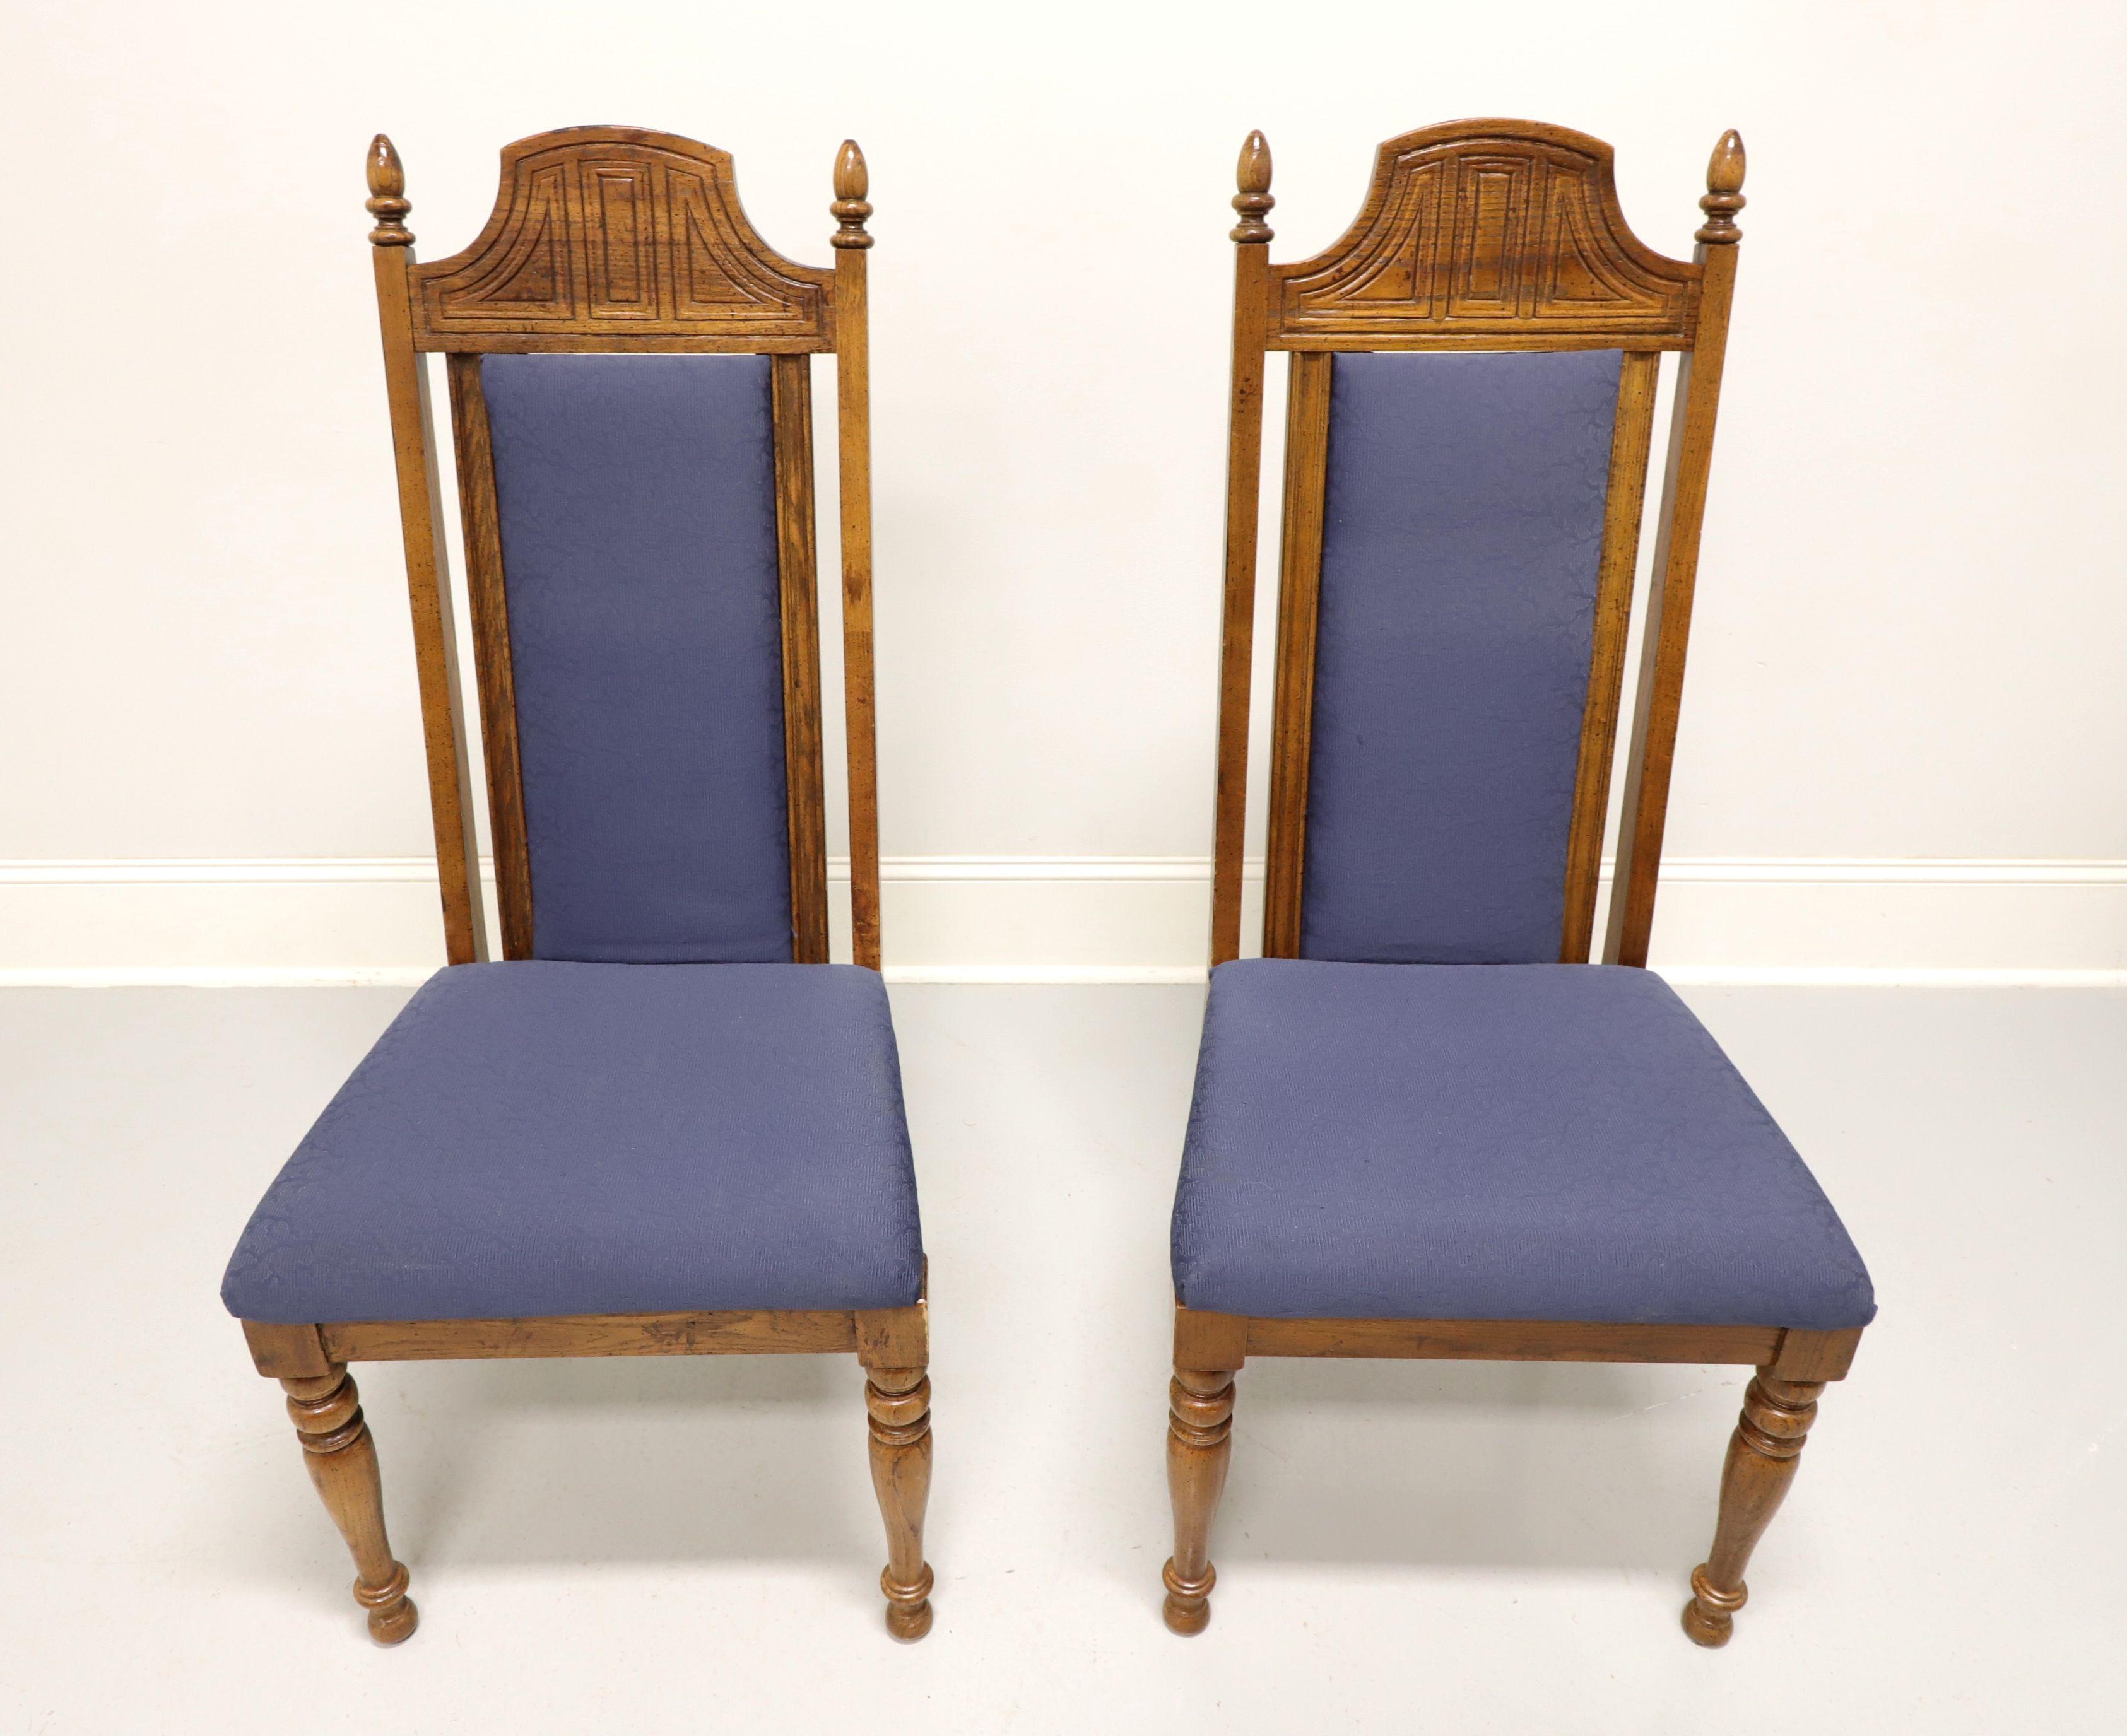 A pair of Spanish Revival style dining side chairs by Burlington House. Solid oak with distressed finish, high backs with rounded solid carved crest rail, square stiles with finial ends & blue color fabric upholstered center back rest, blue color